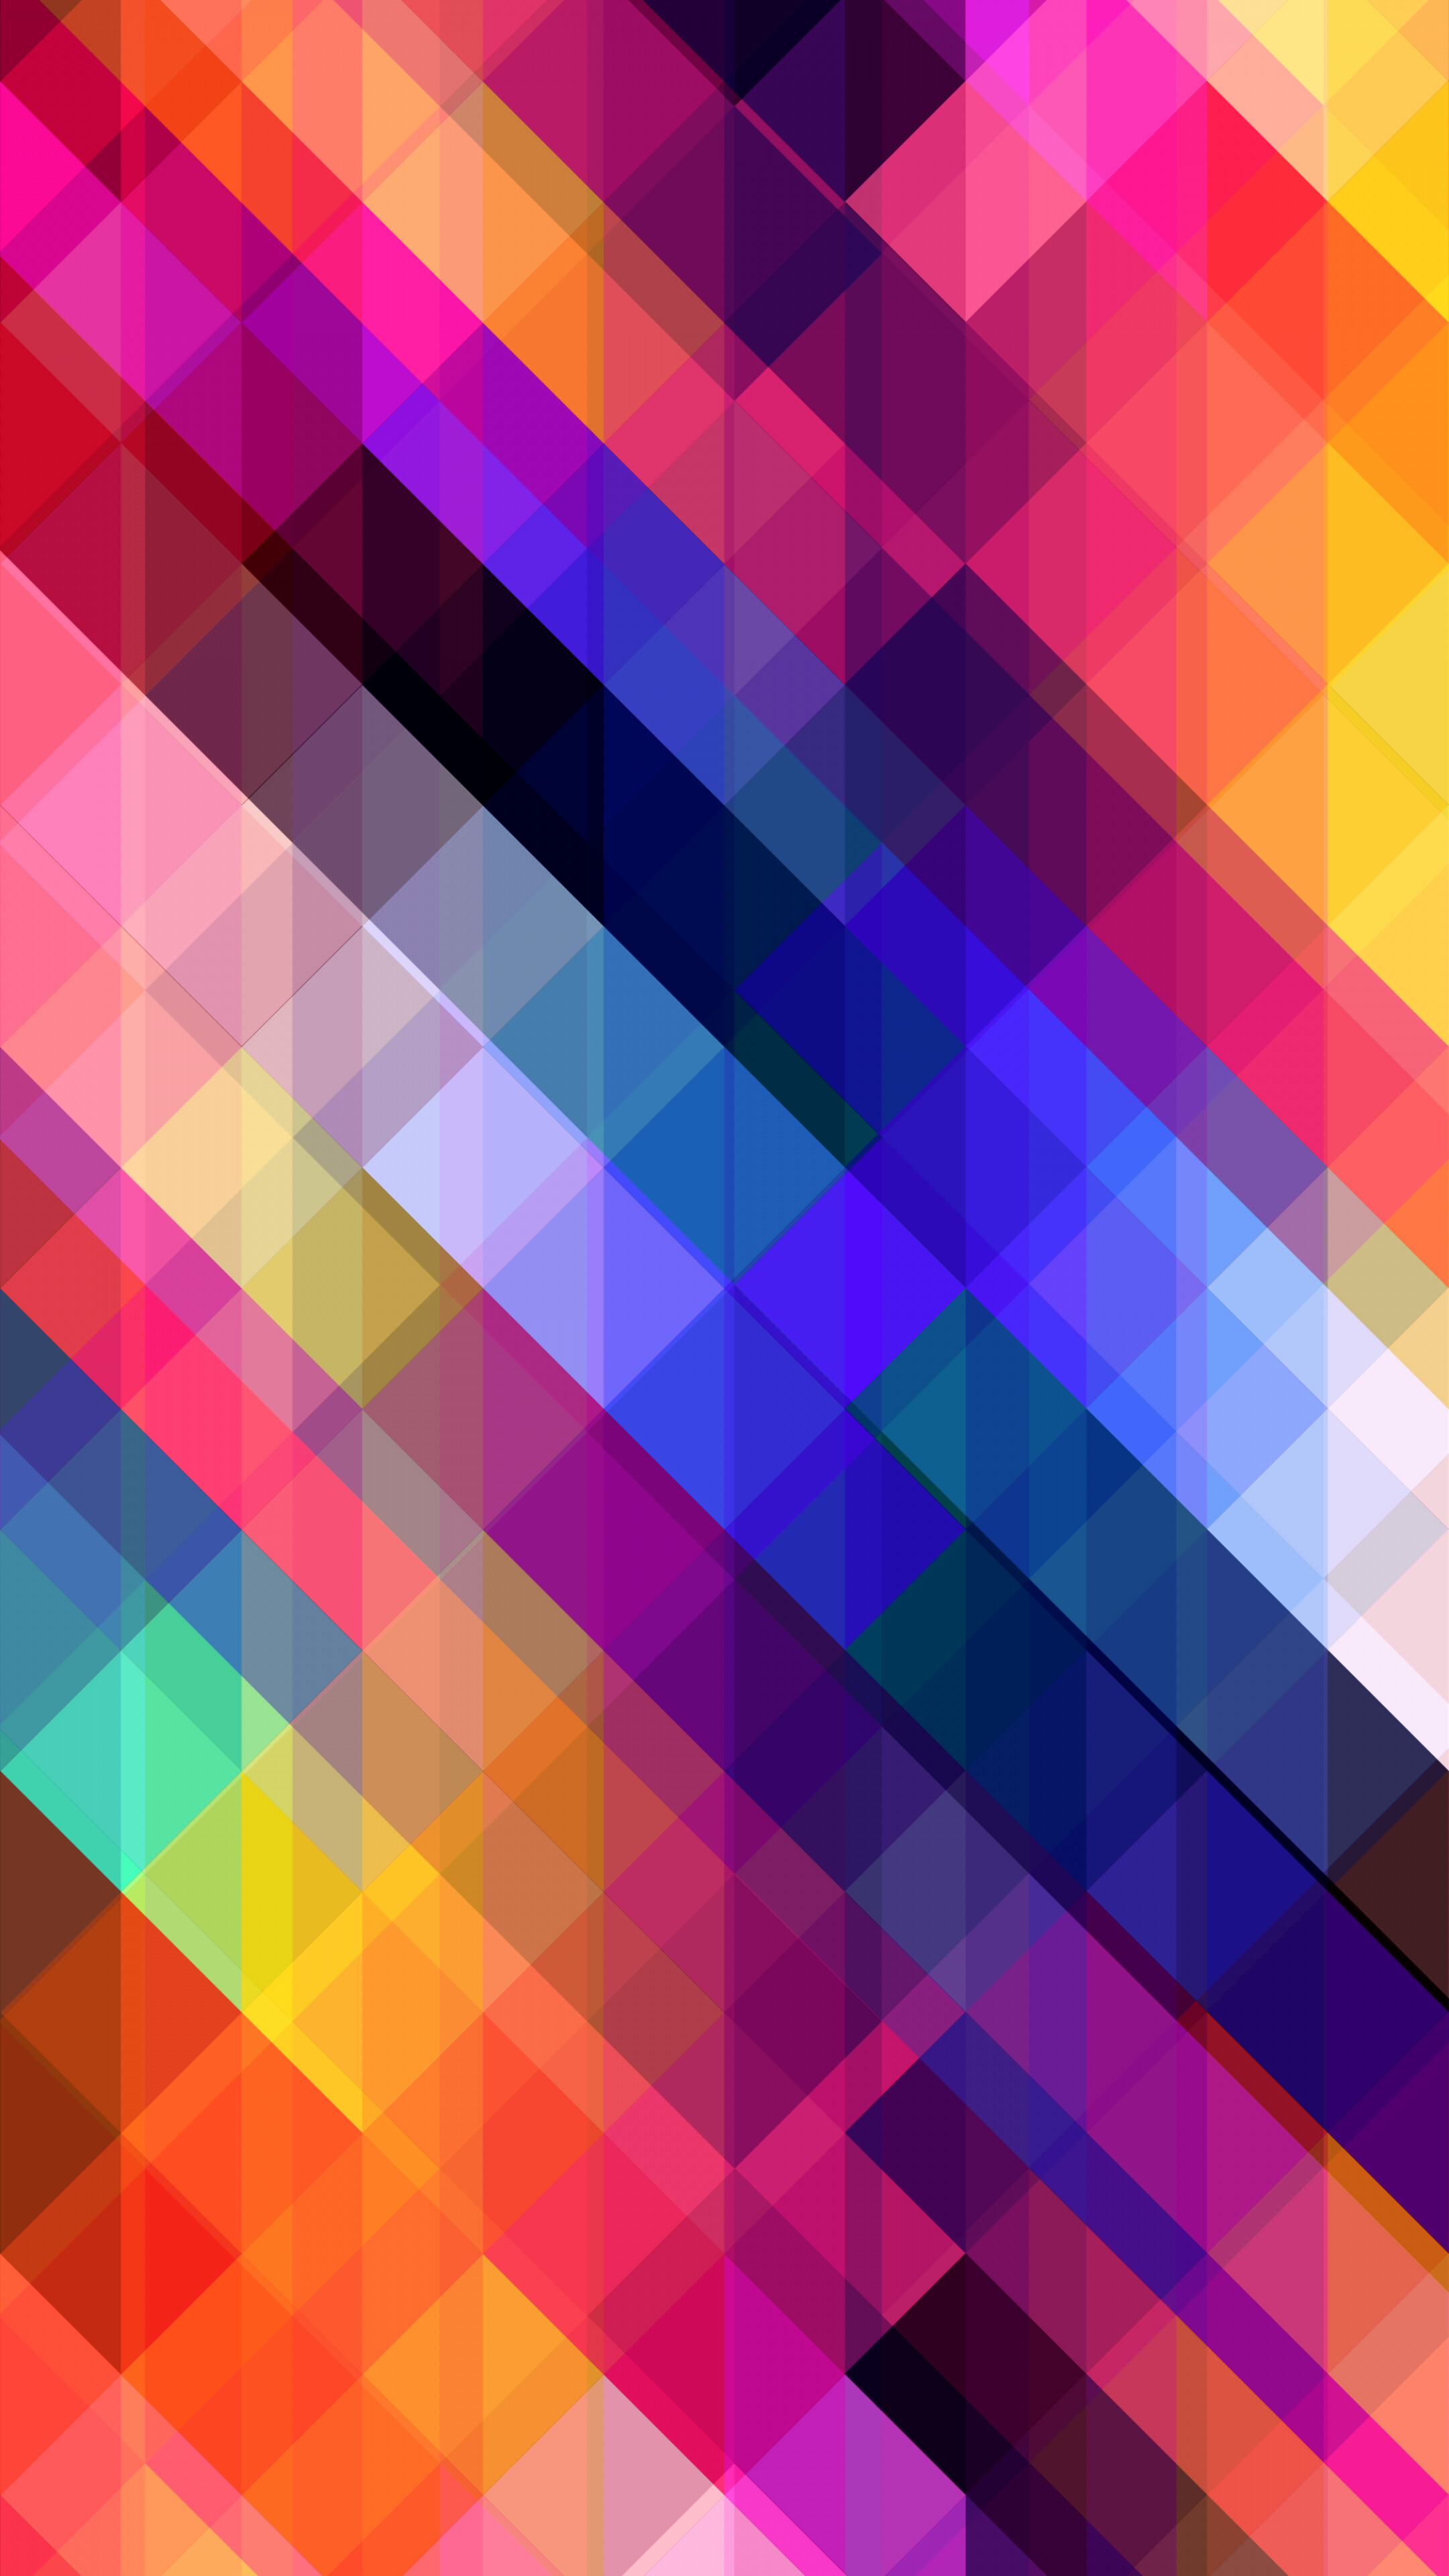 Geometric Abstract: Stripes, Crossed, Multicolored, Colorful, Squares. 2160x3840 4K Wallpaper.